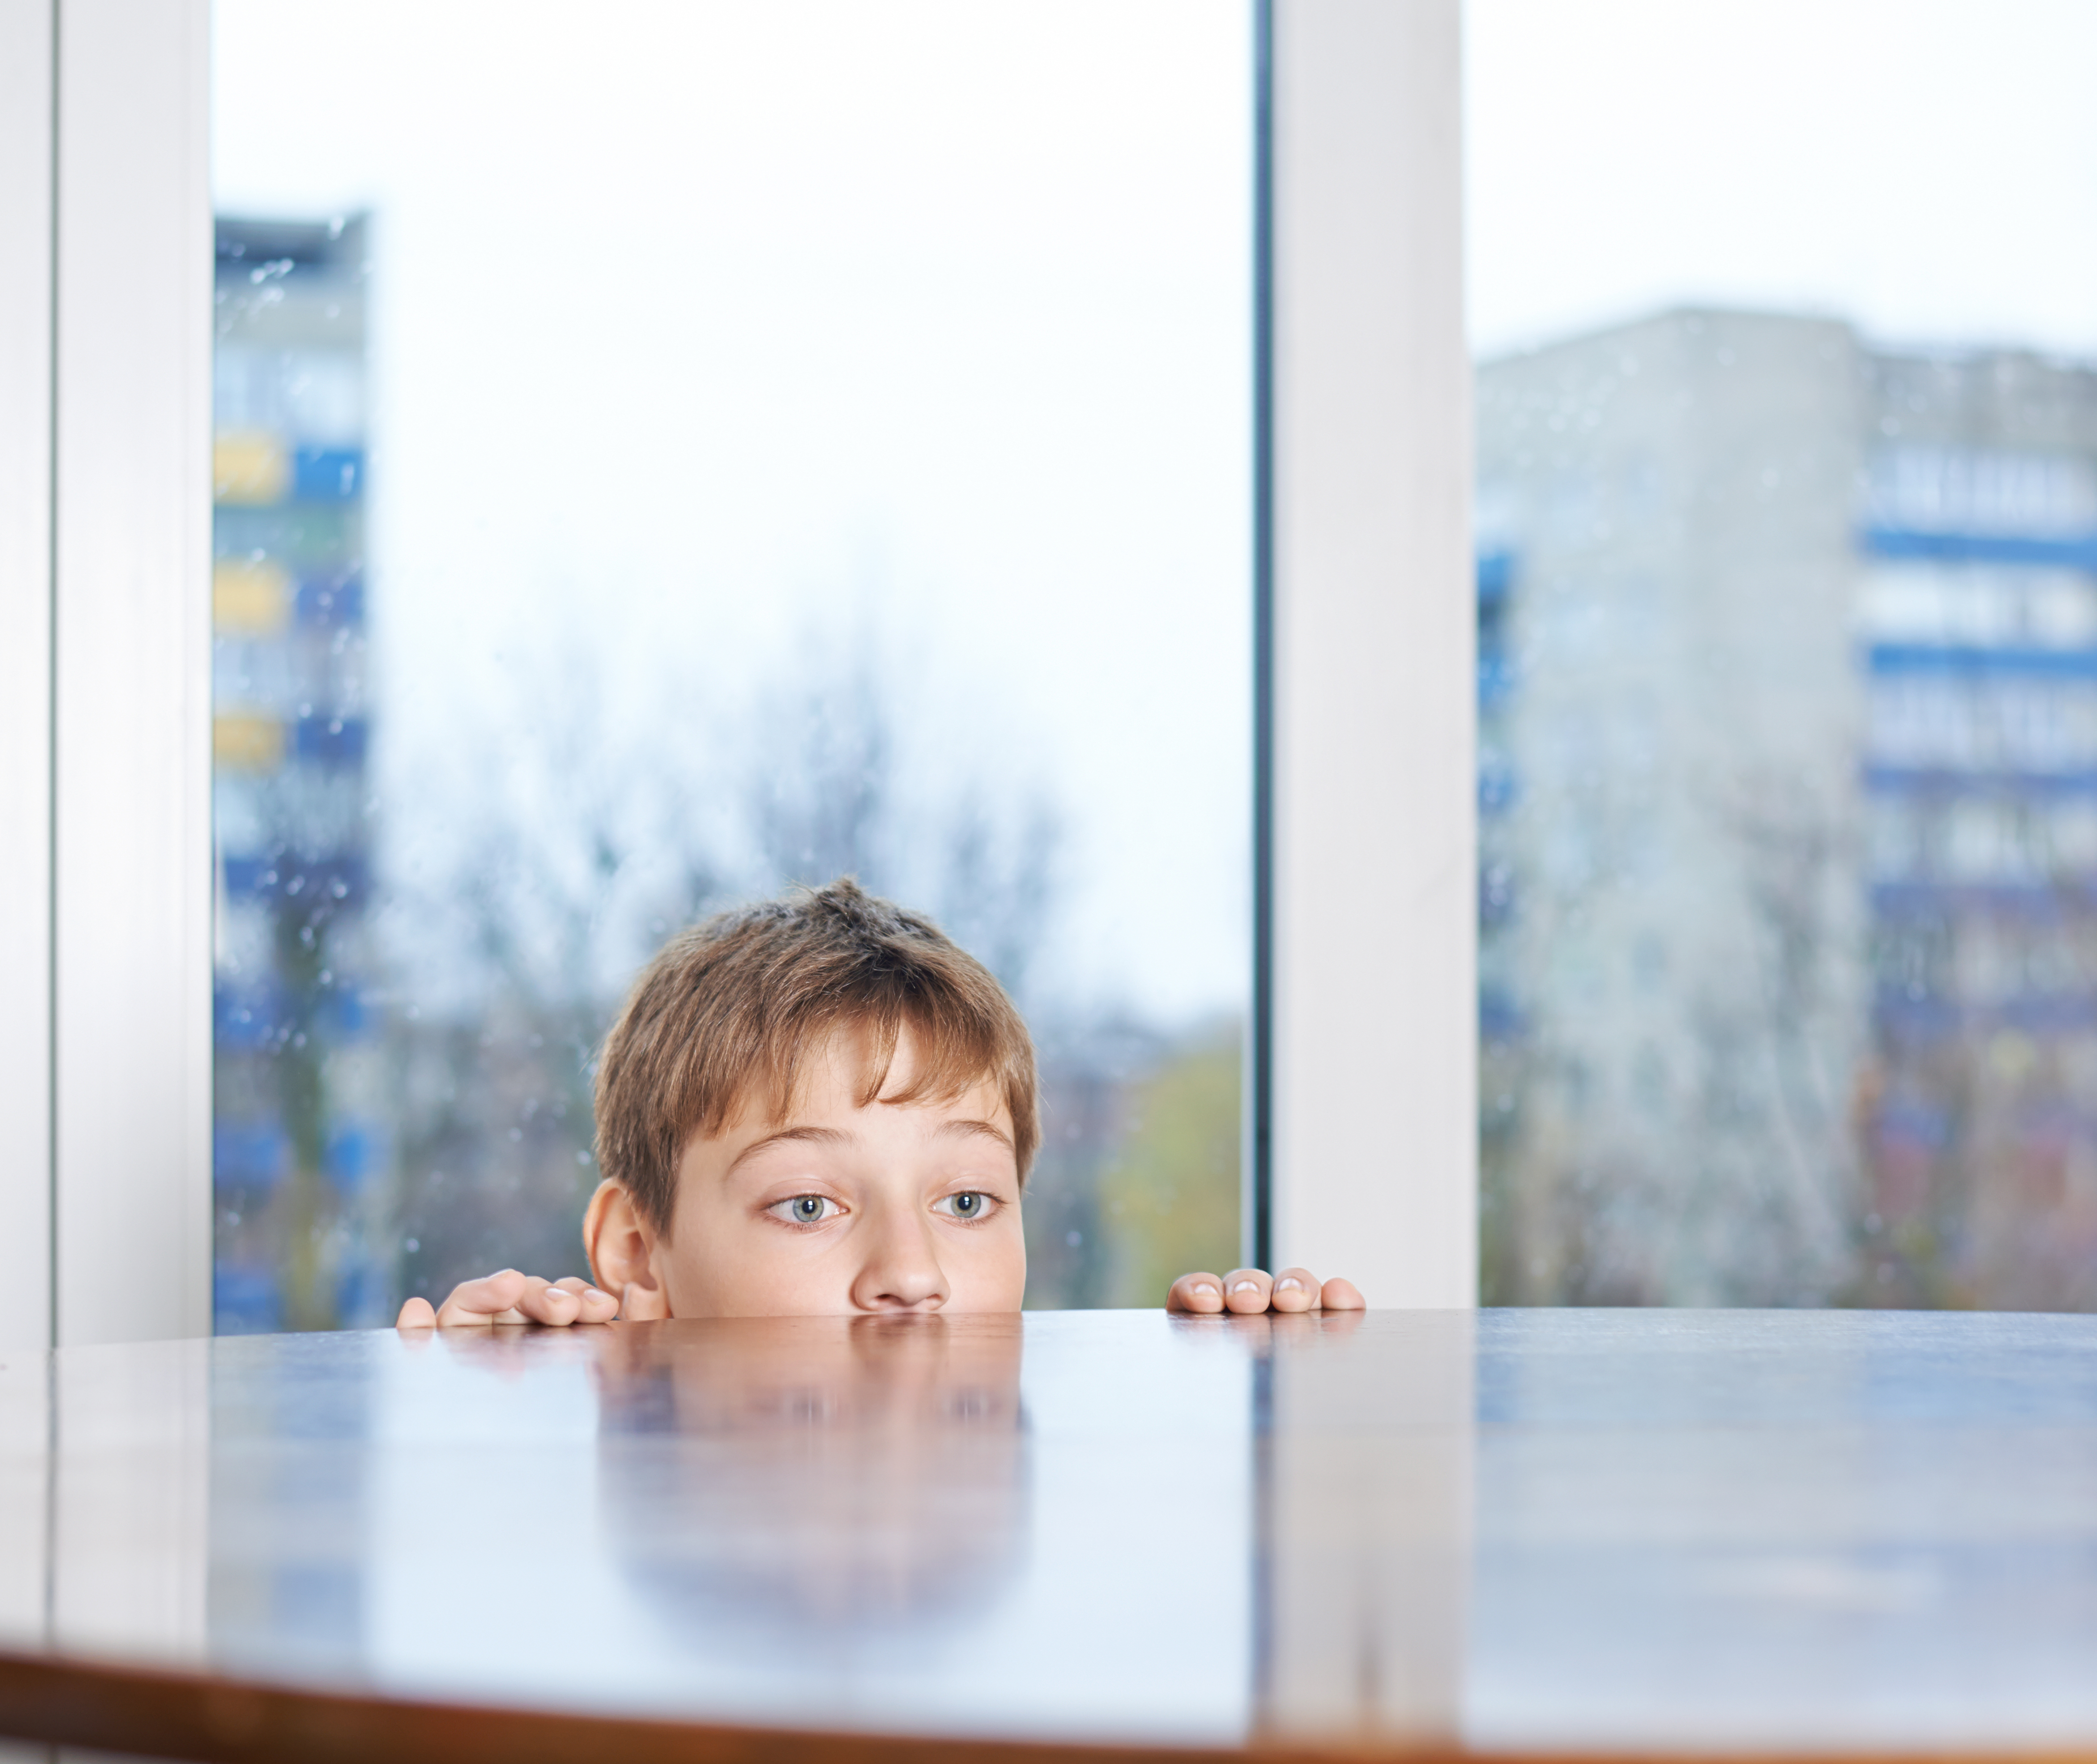 A young boy peeking from behind a wooden table | Source: Shutterstock